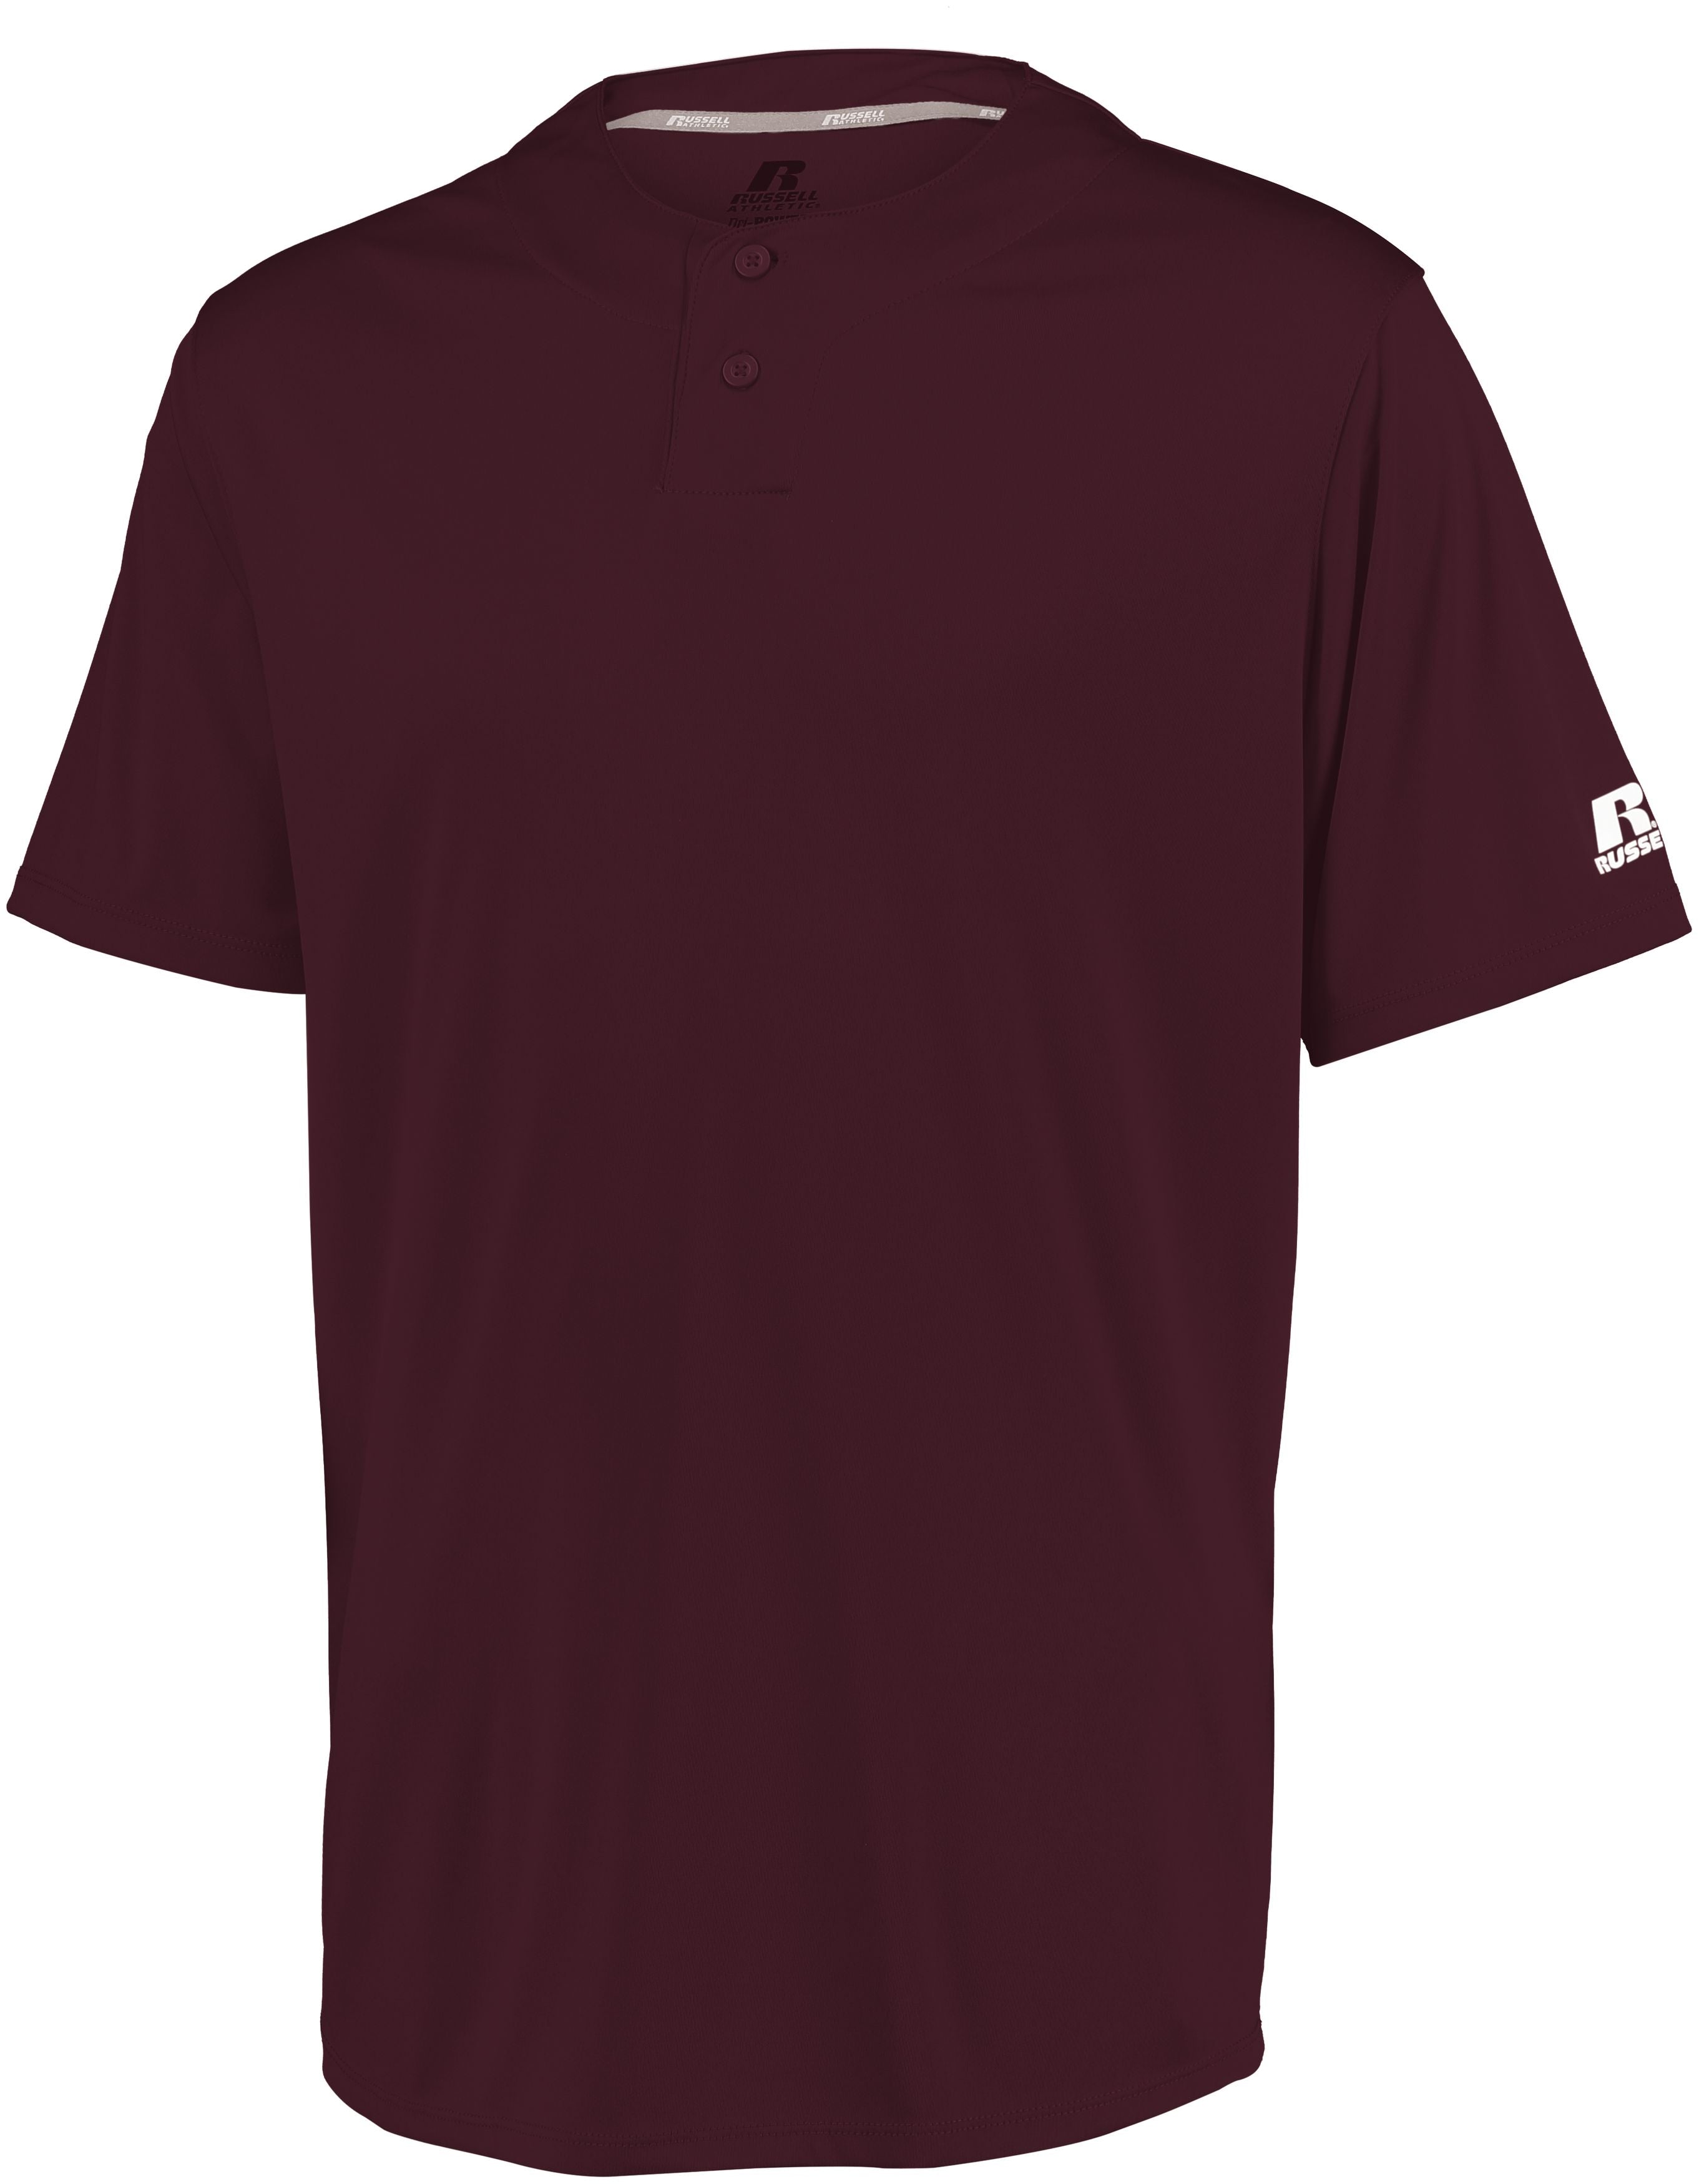 Russell Athletic Youth Performance Two-Button Solid Jersey in Maroon  -Part of the Youth, Youth-Jersey, Baseball, Russell-Athletic-Products, Shirts, All-Sports, All-Sports-1 product lines at KanaleyCreations.com